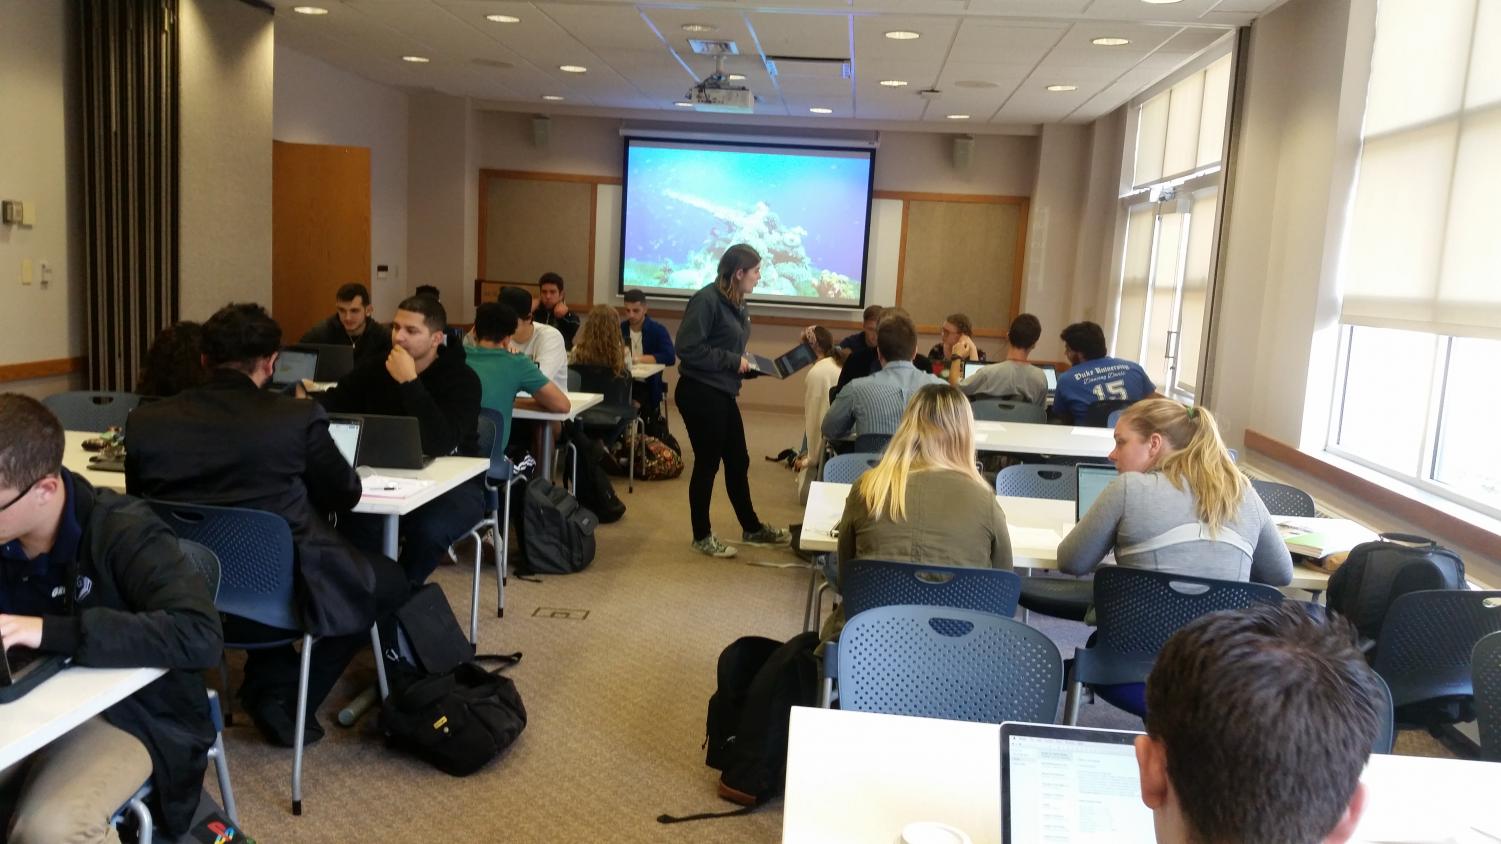 Students from a first-year writing seminar and the digital rhetorics class working in the United, Brethrens, & Church Rooms during the National Week on Writing. Credit: Gabrielle Stanley